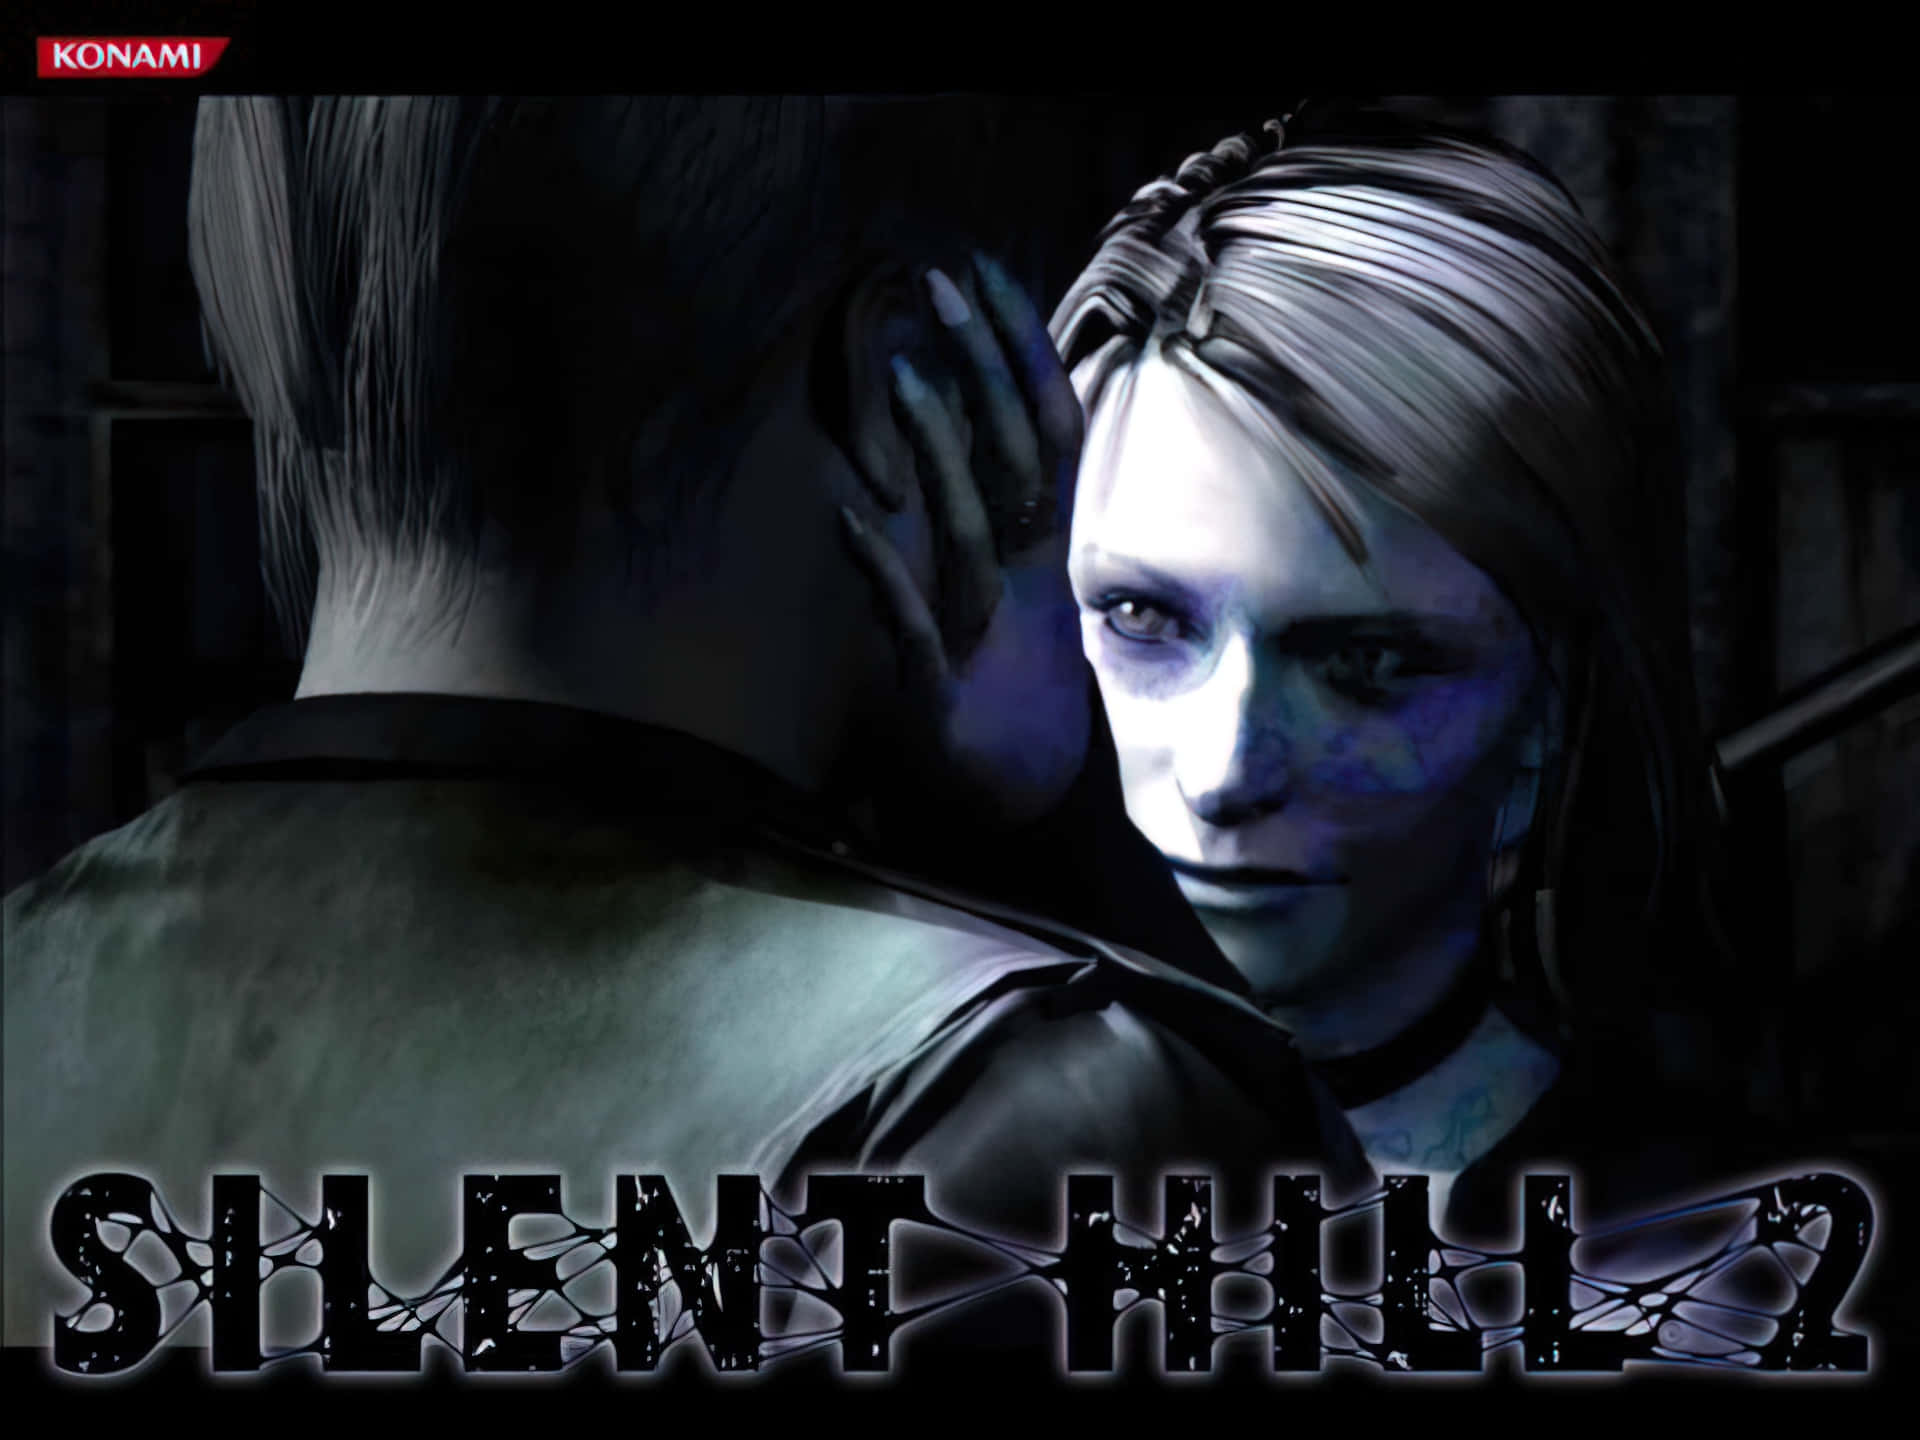 "Discover the secrets of Silent Hill"